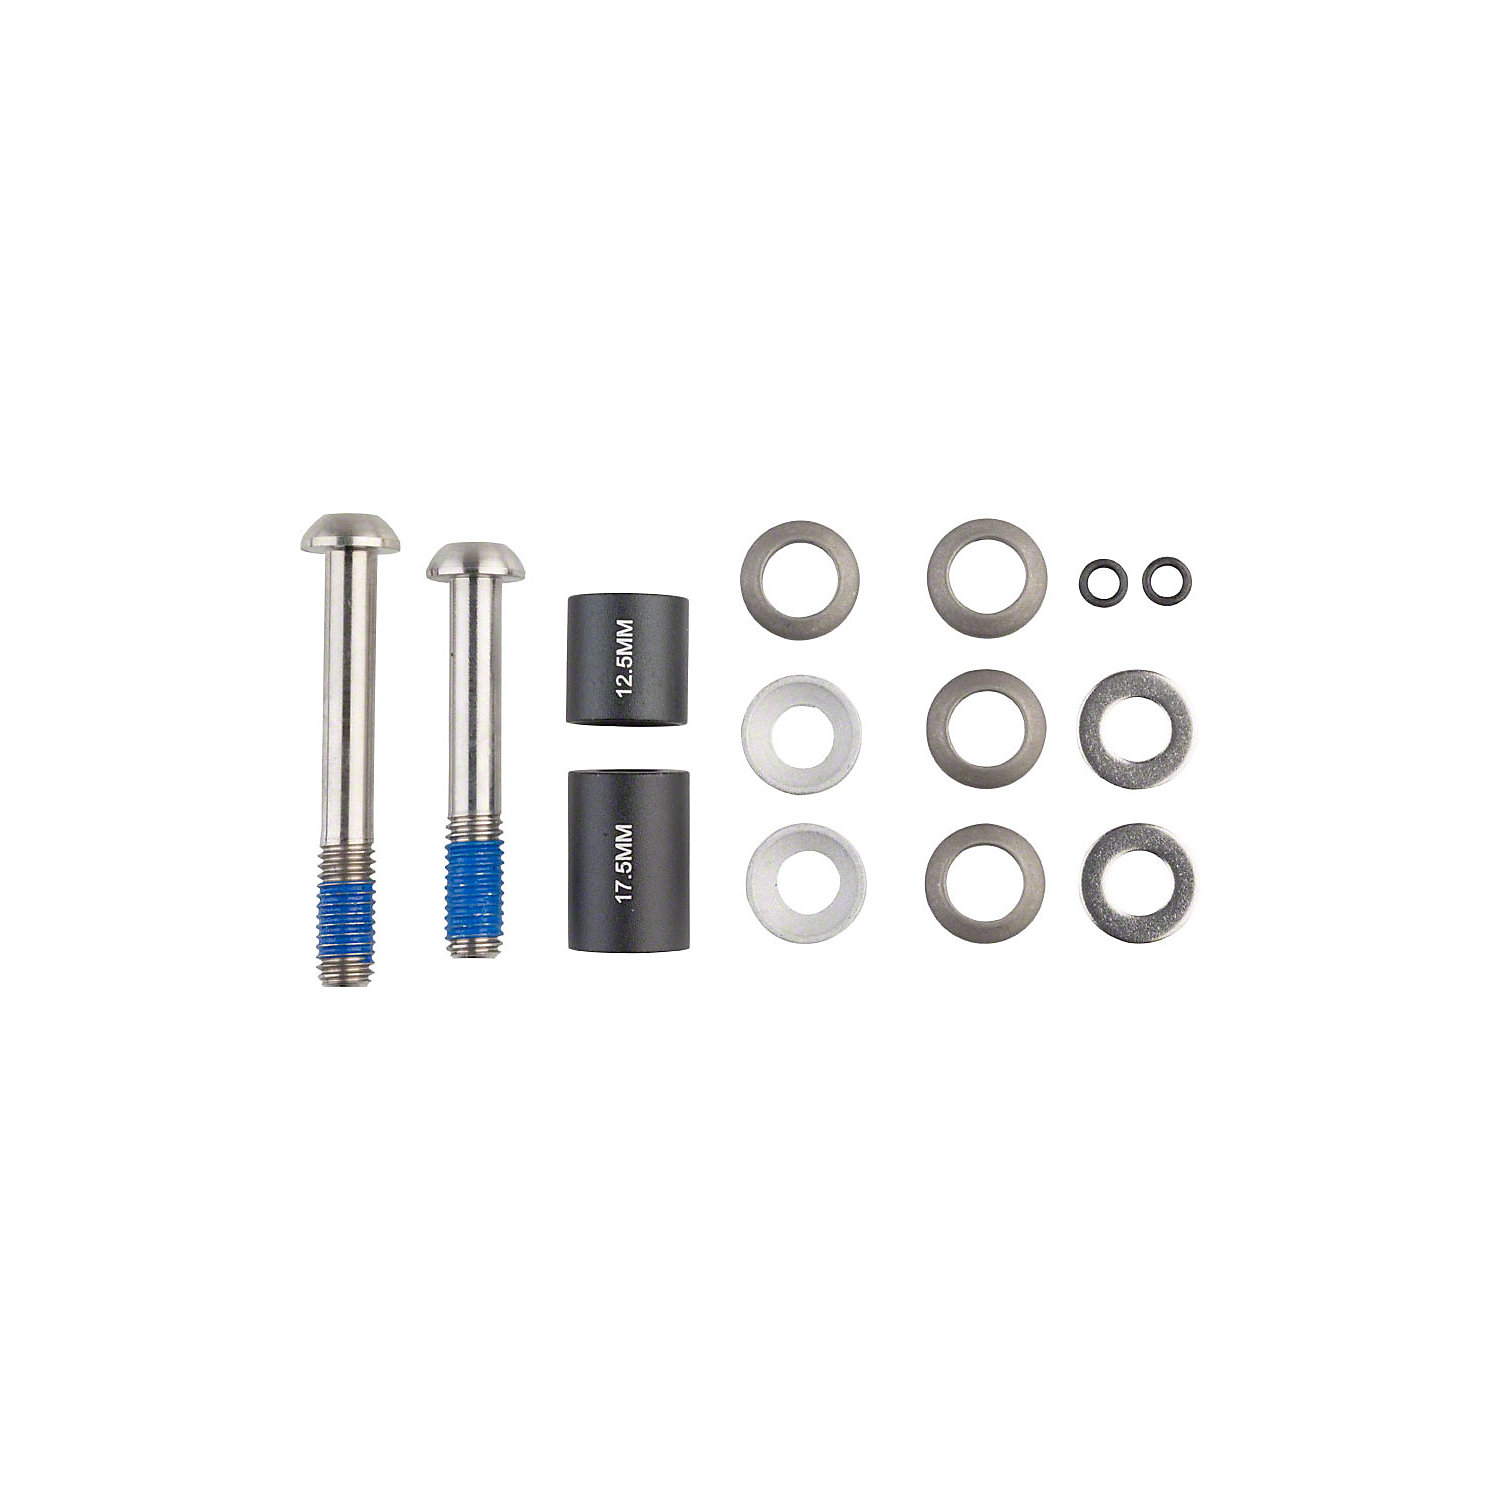 Avid 20mm Disc Post Spacer Kit with Titanium Standard Bolts